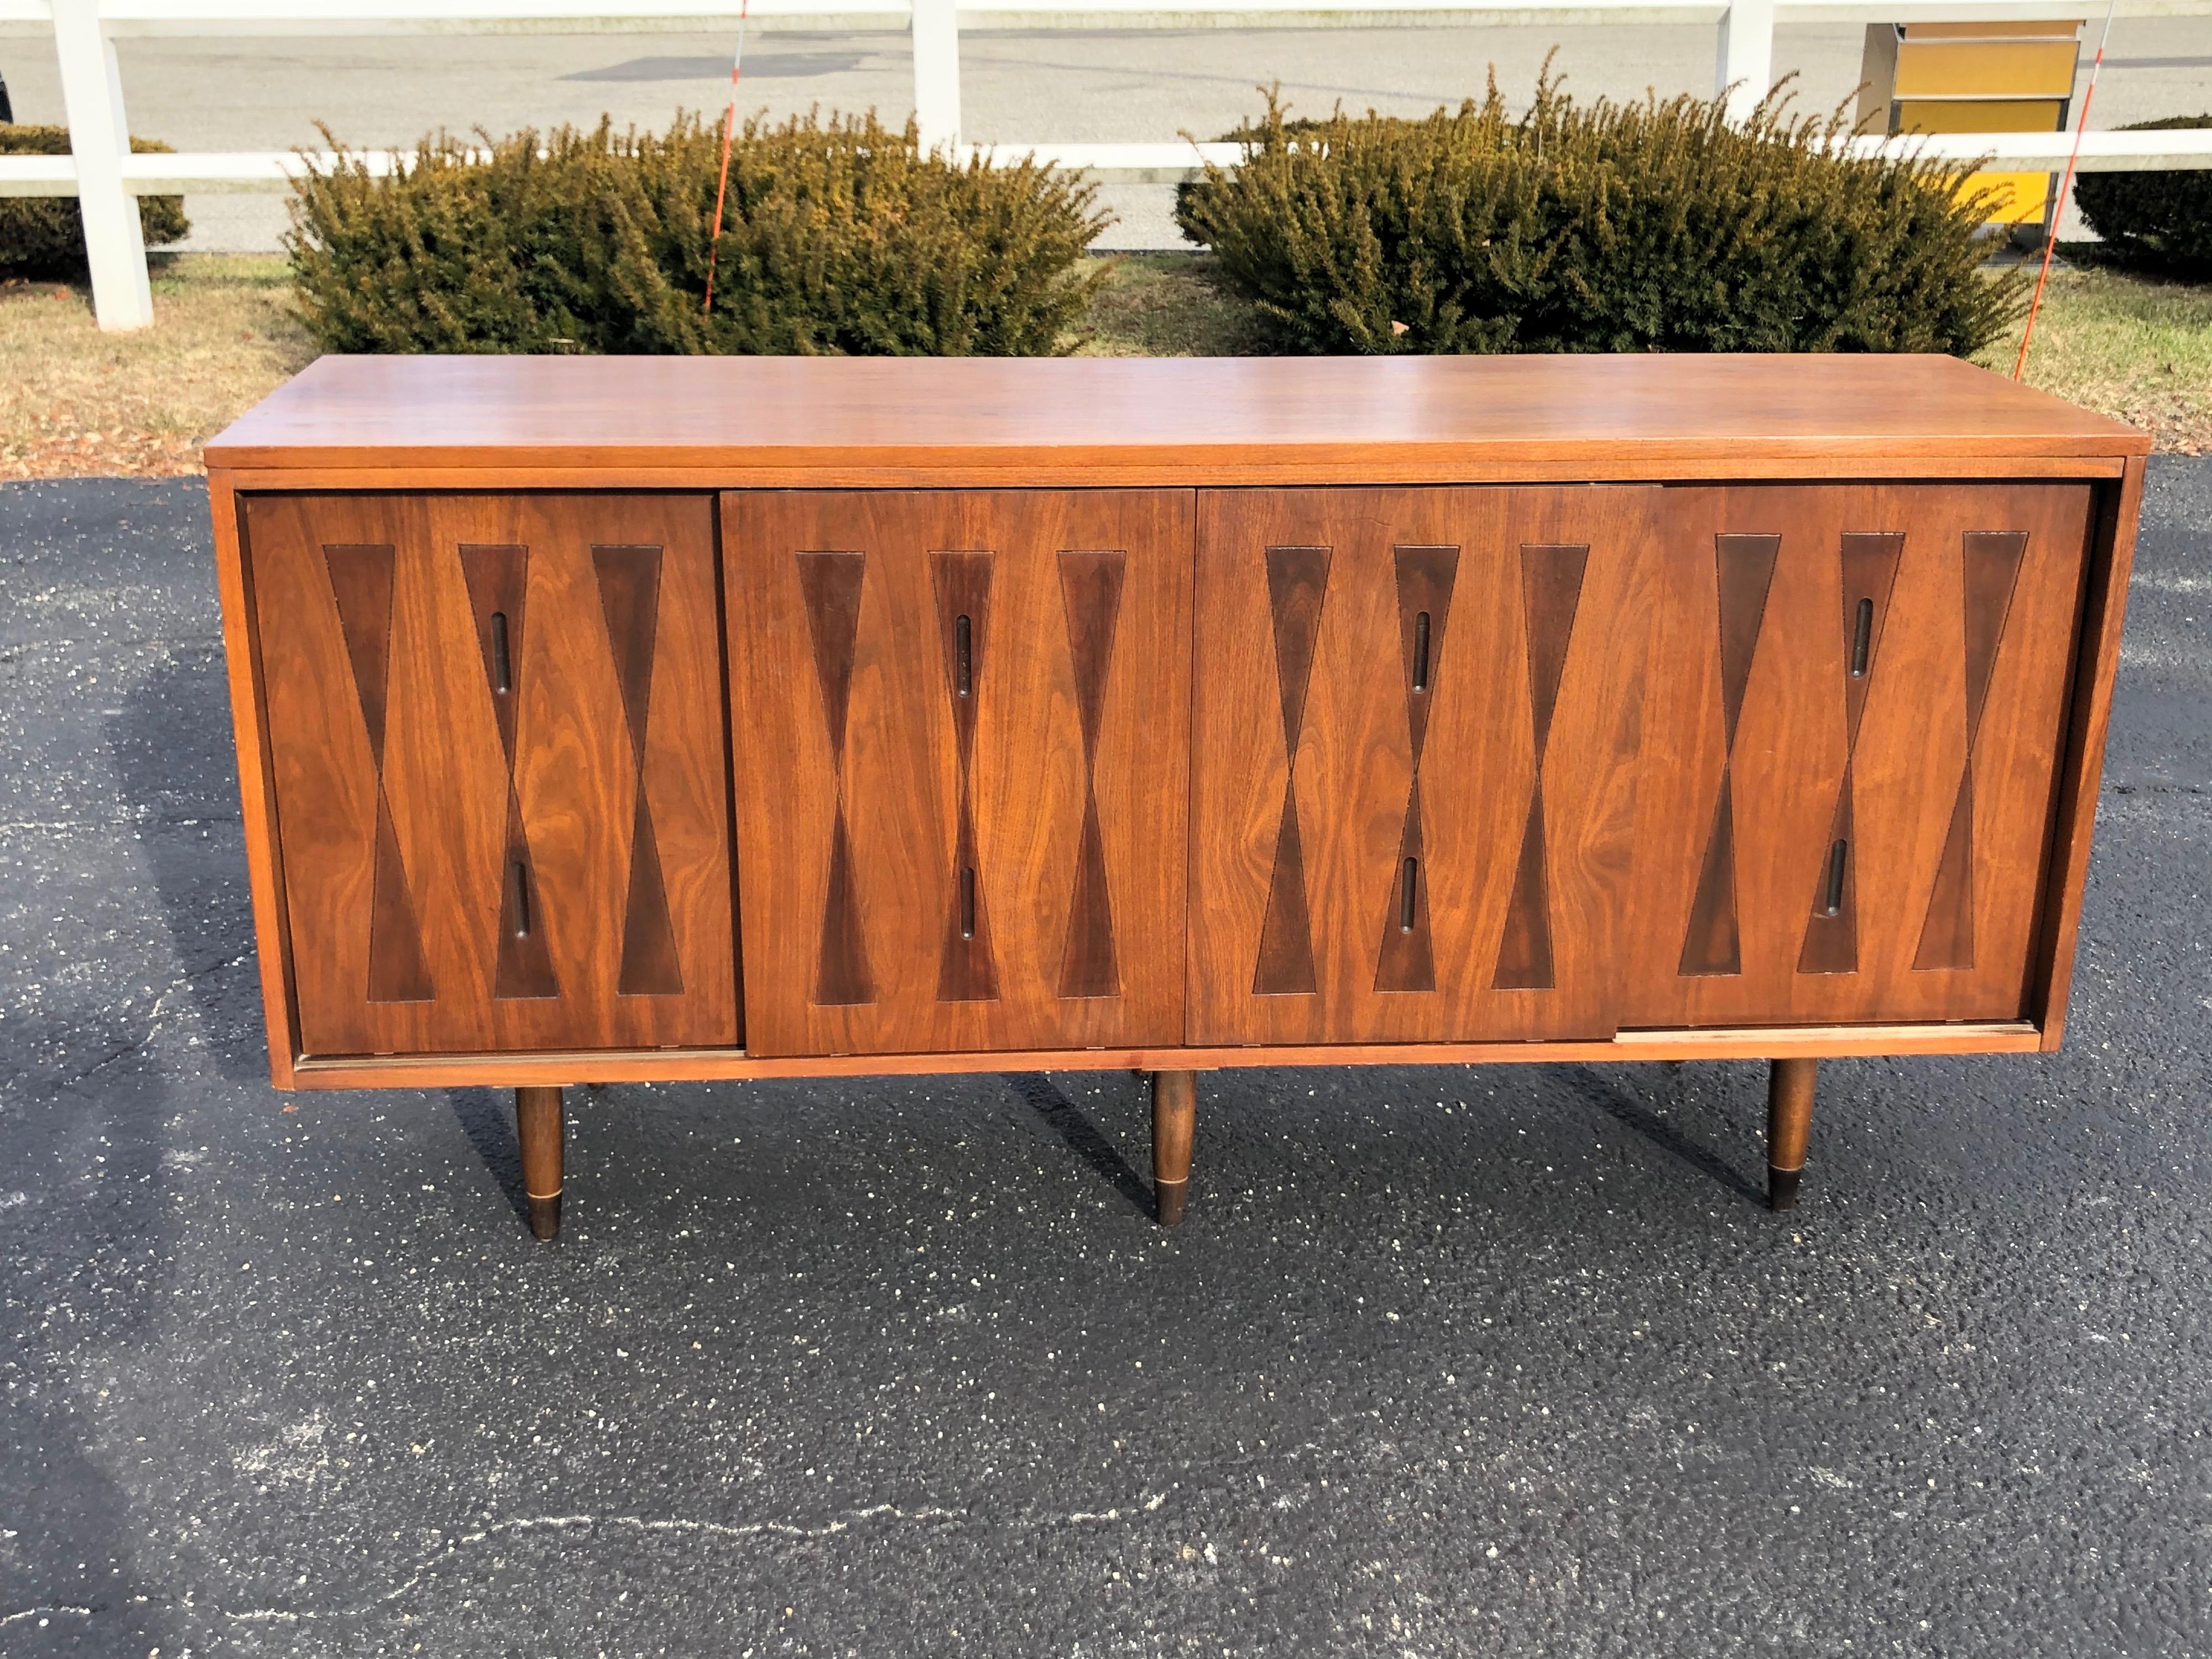 Mid-Century Modern walnut credenza. Unique two-toned harlequin pattern on four front doors. Four front doors slide on tracks to reveal interior shelving. Solid well built piece with 6 legs. It is rare to have two center support legs. So this is a